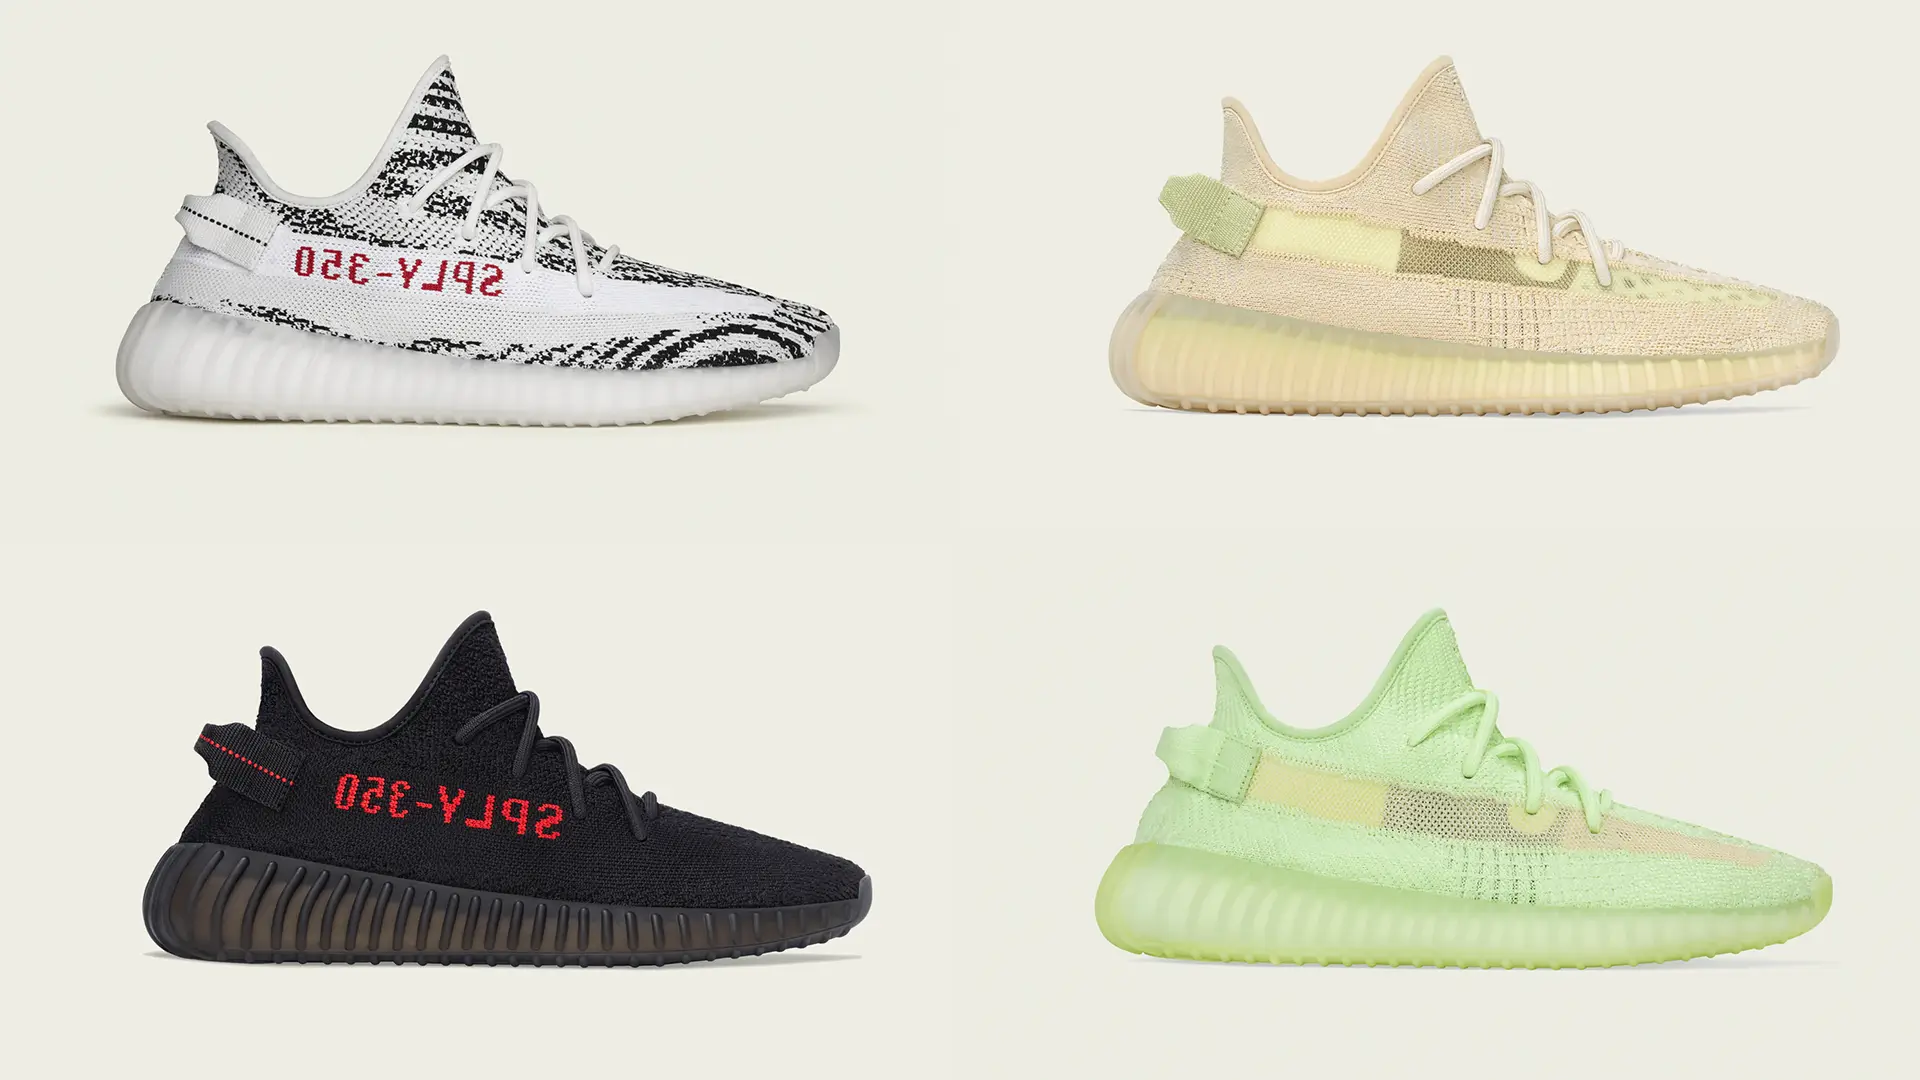 adidas Will Sell Remaining Yeezy Inventory & Donate Profits to Charity ...